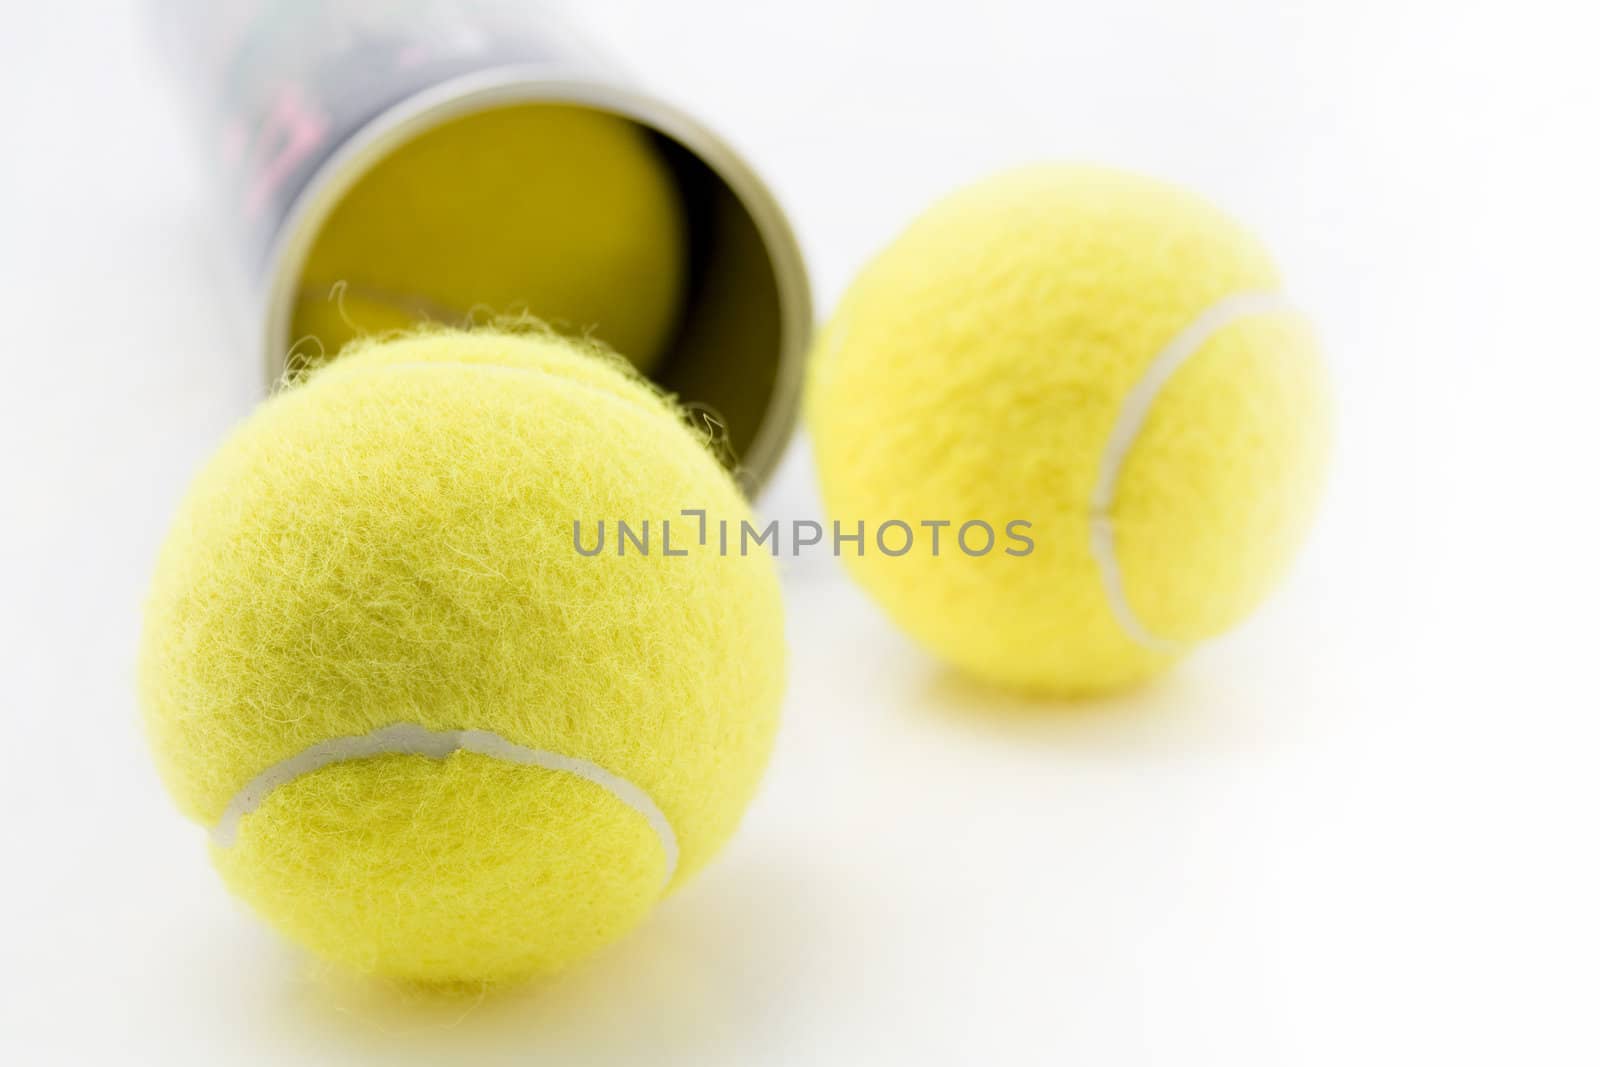 Close-up image of tennis balls on white background